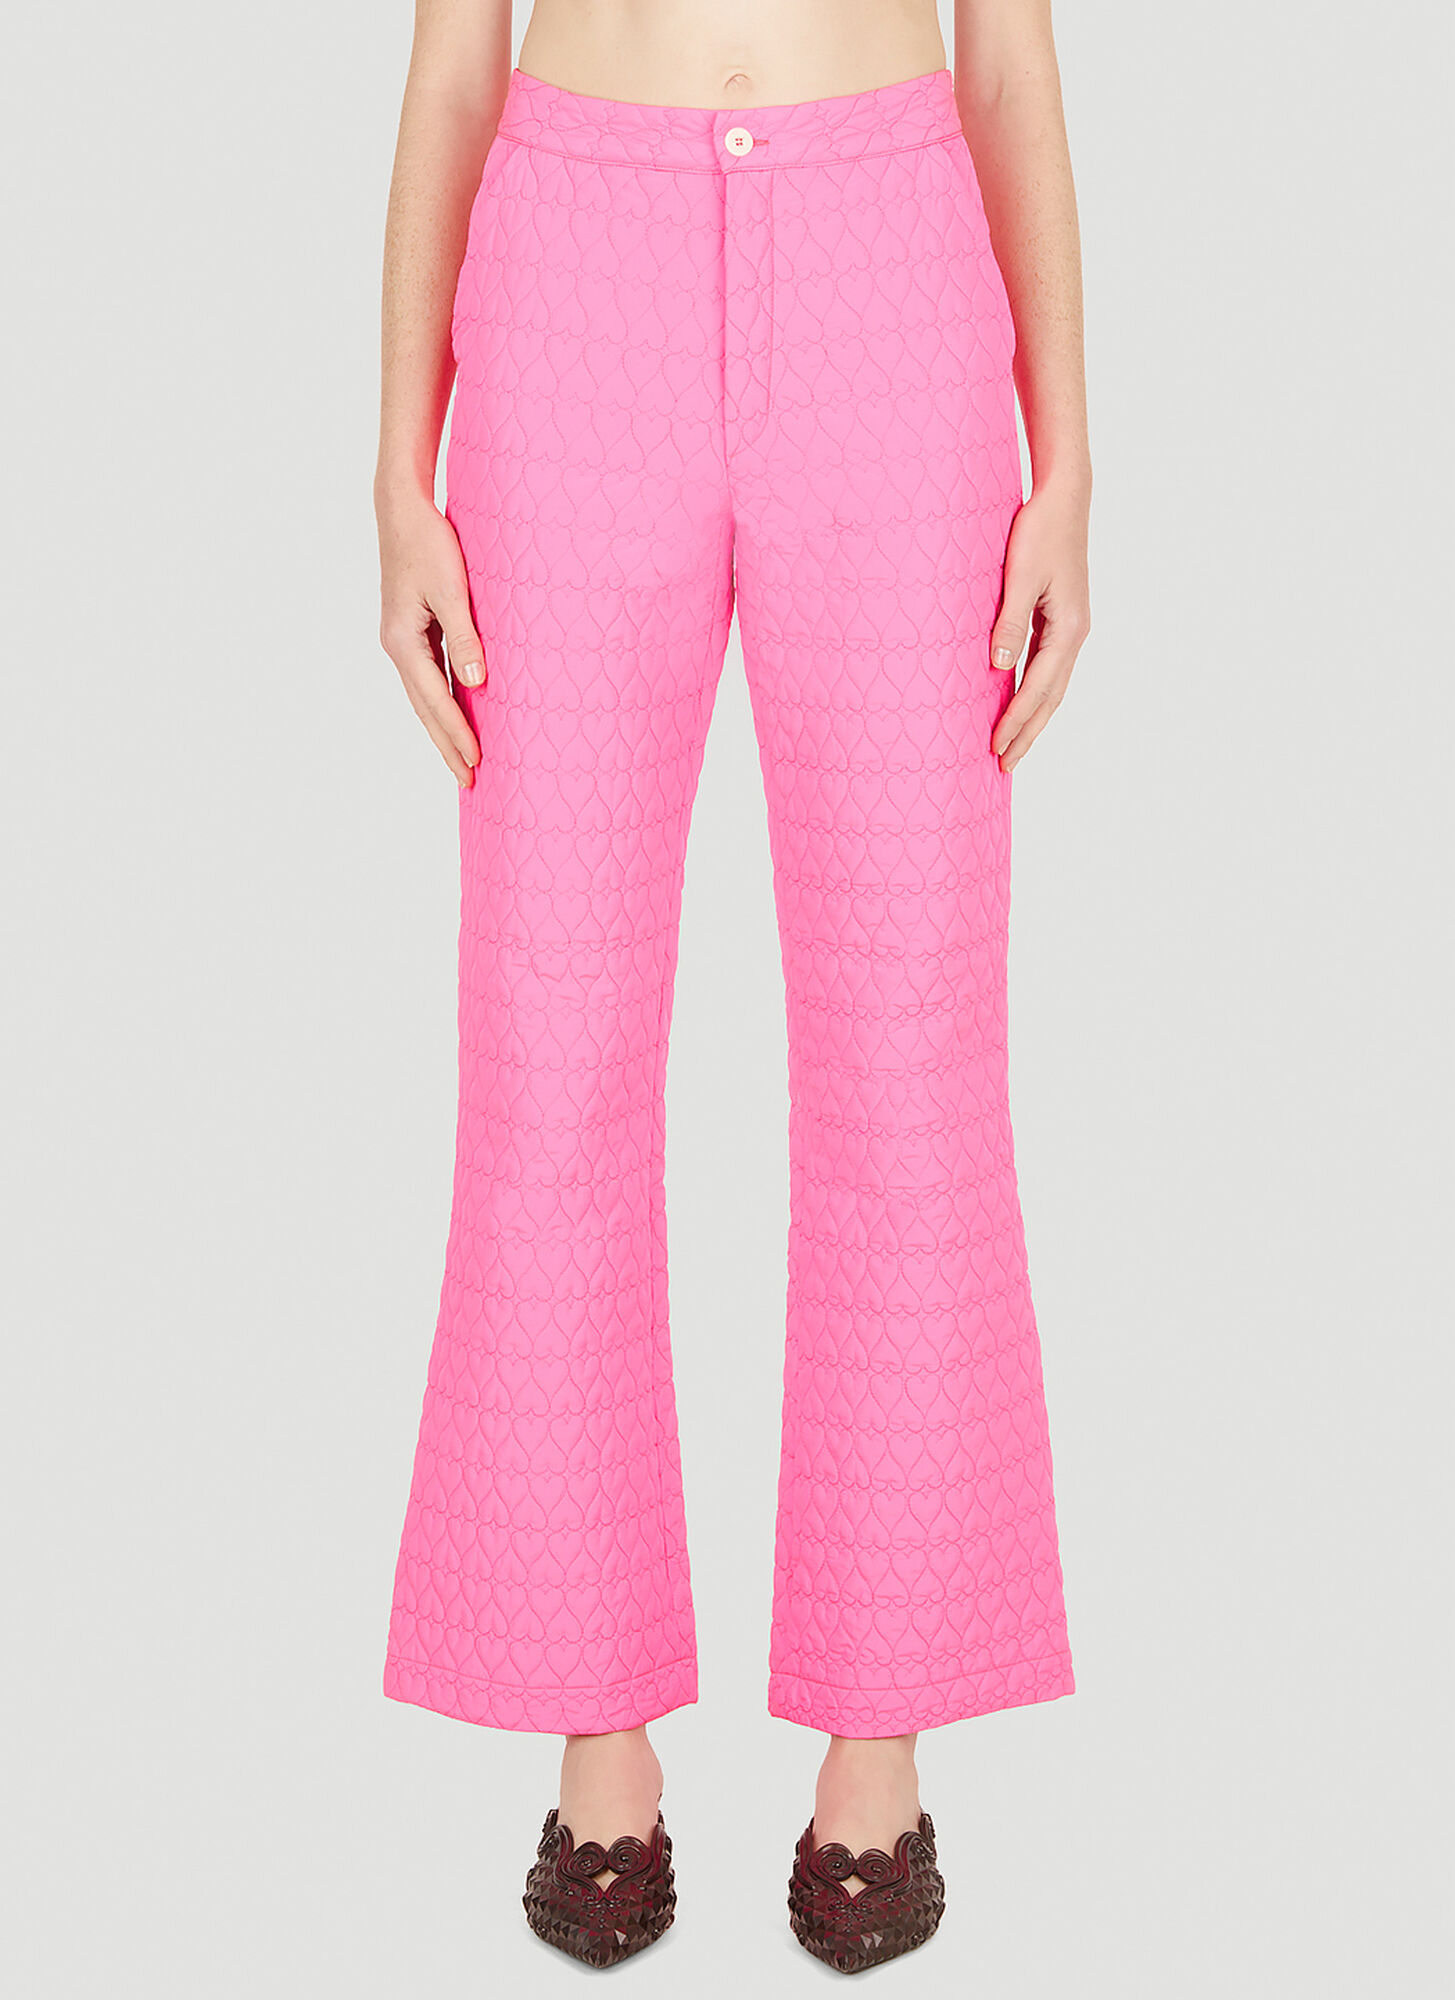 Marco Rambaldi Quilted Heart Pants Female Pink